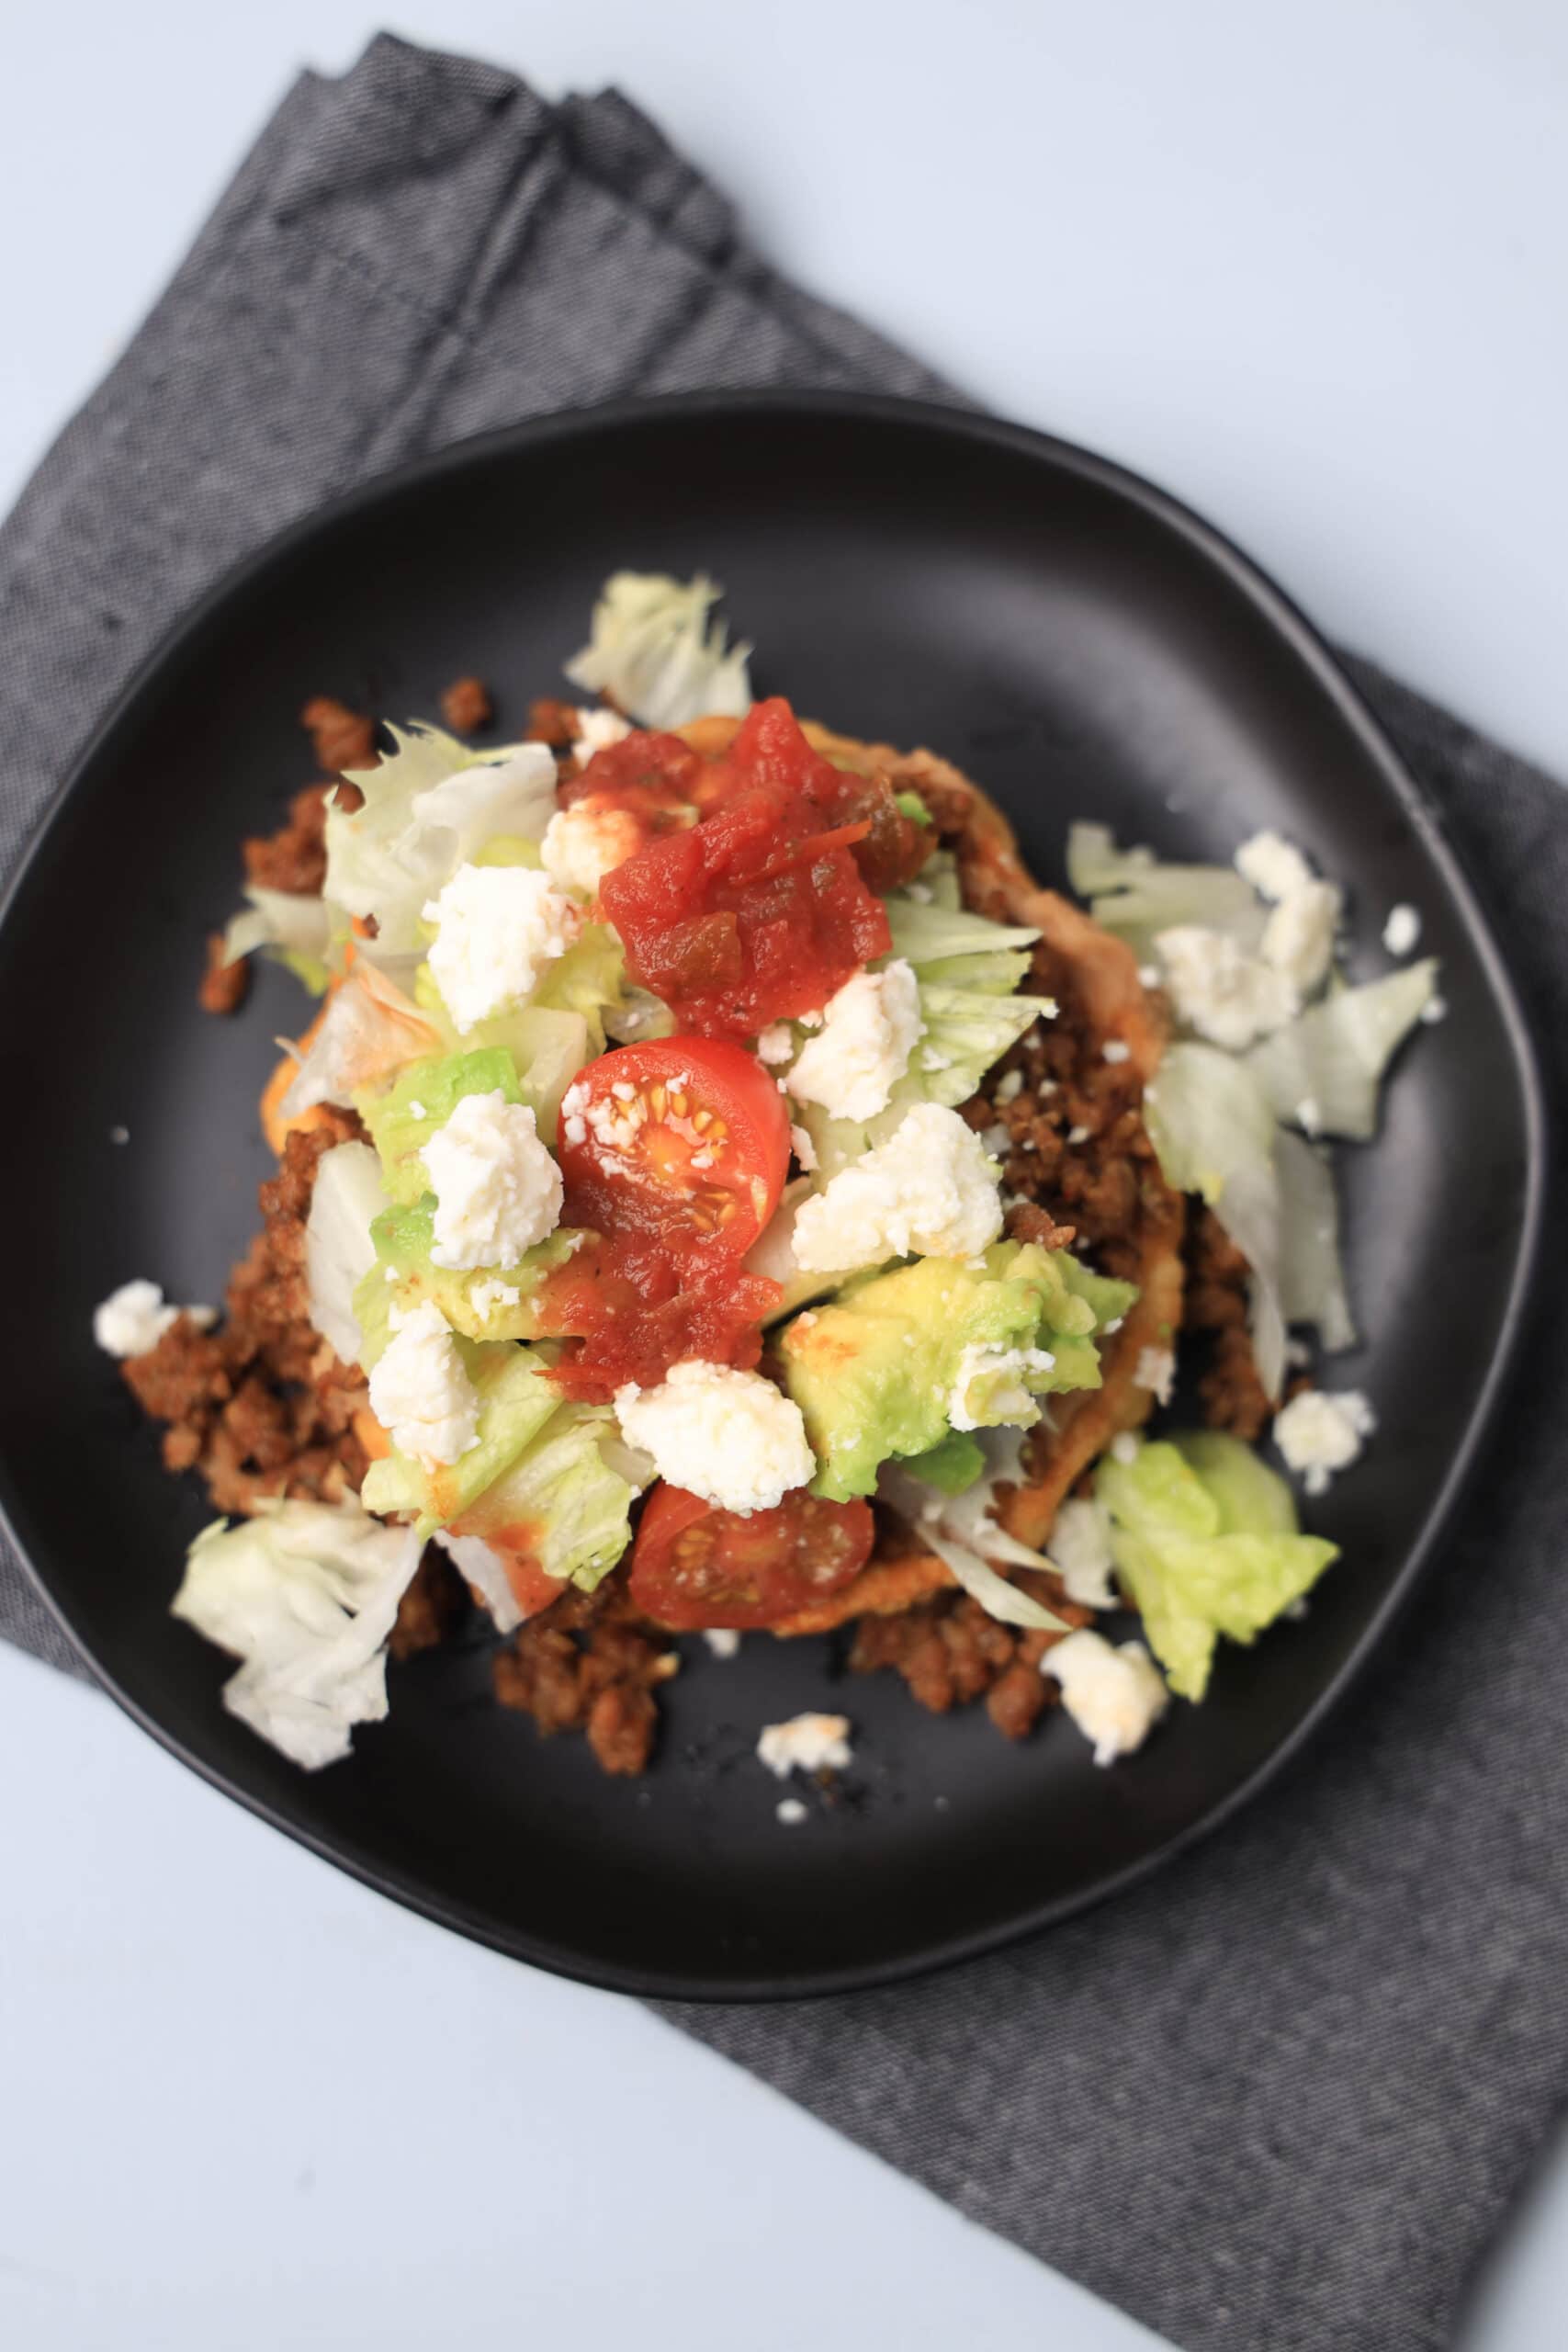 A sope on a black plate with ground beef, tomatoes, cheese, and avocado toppings